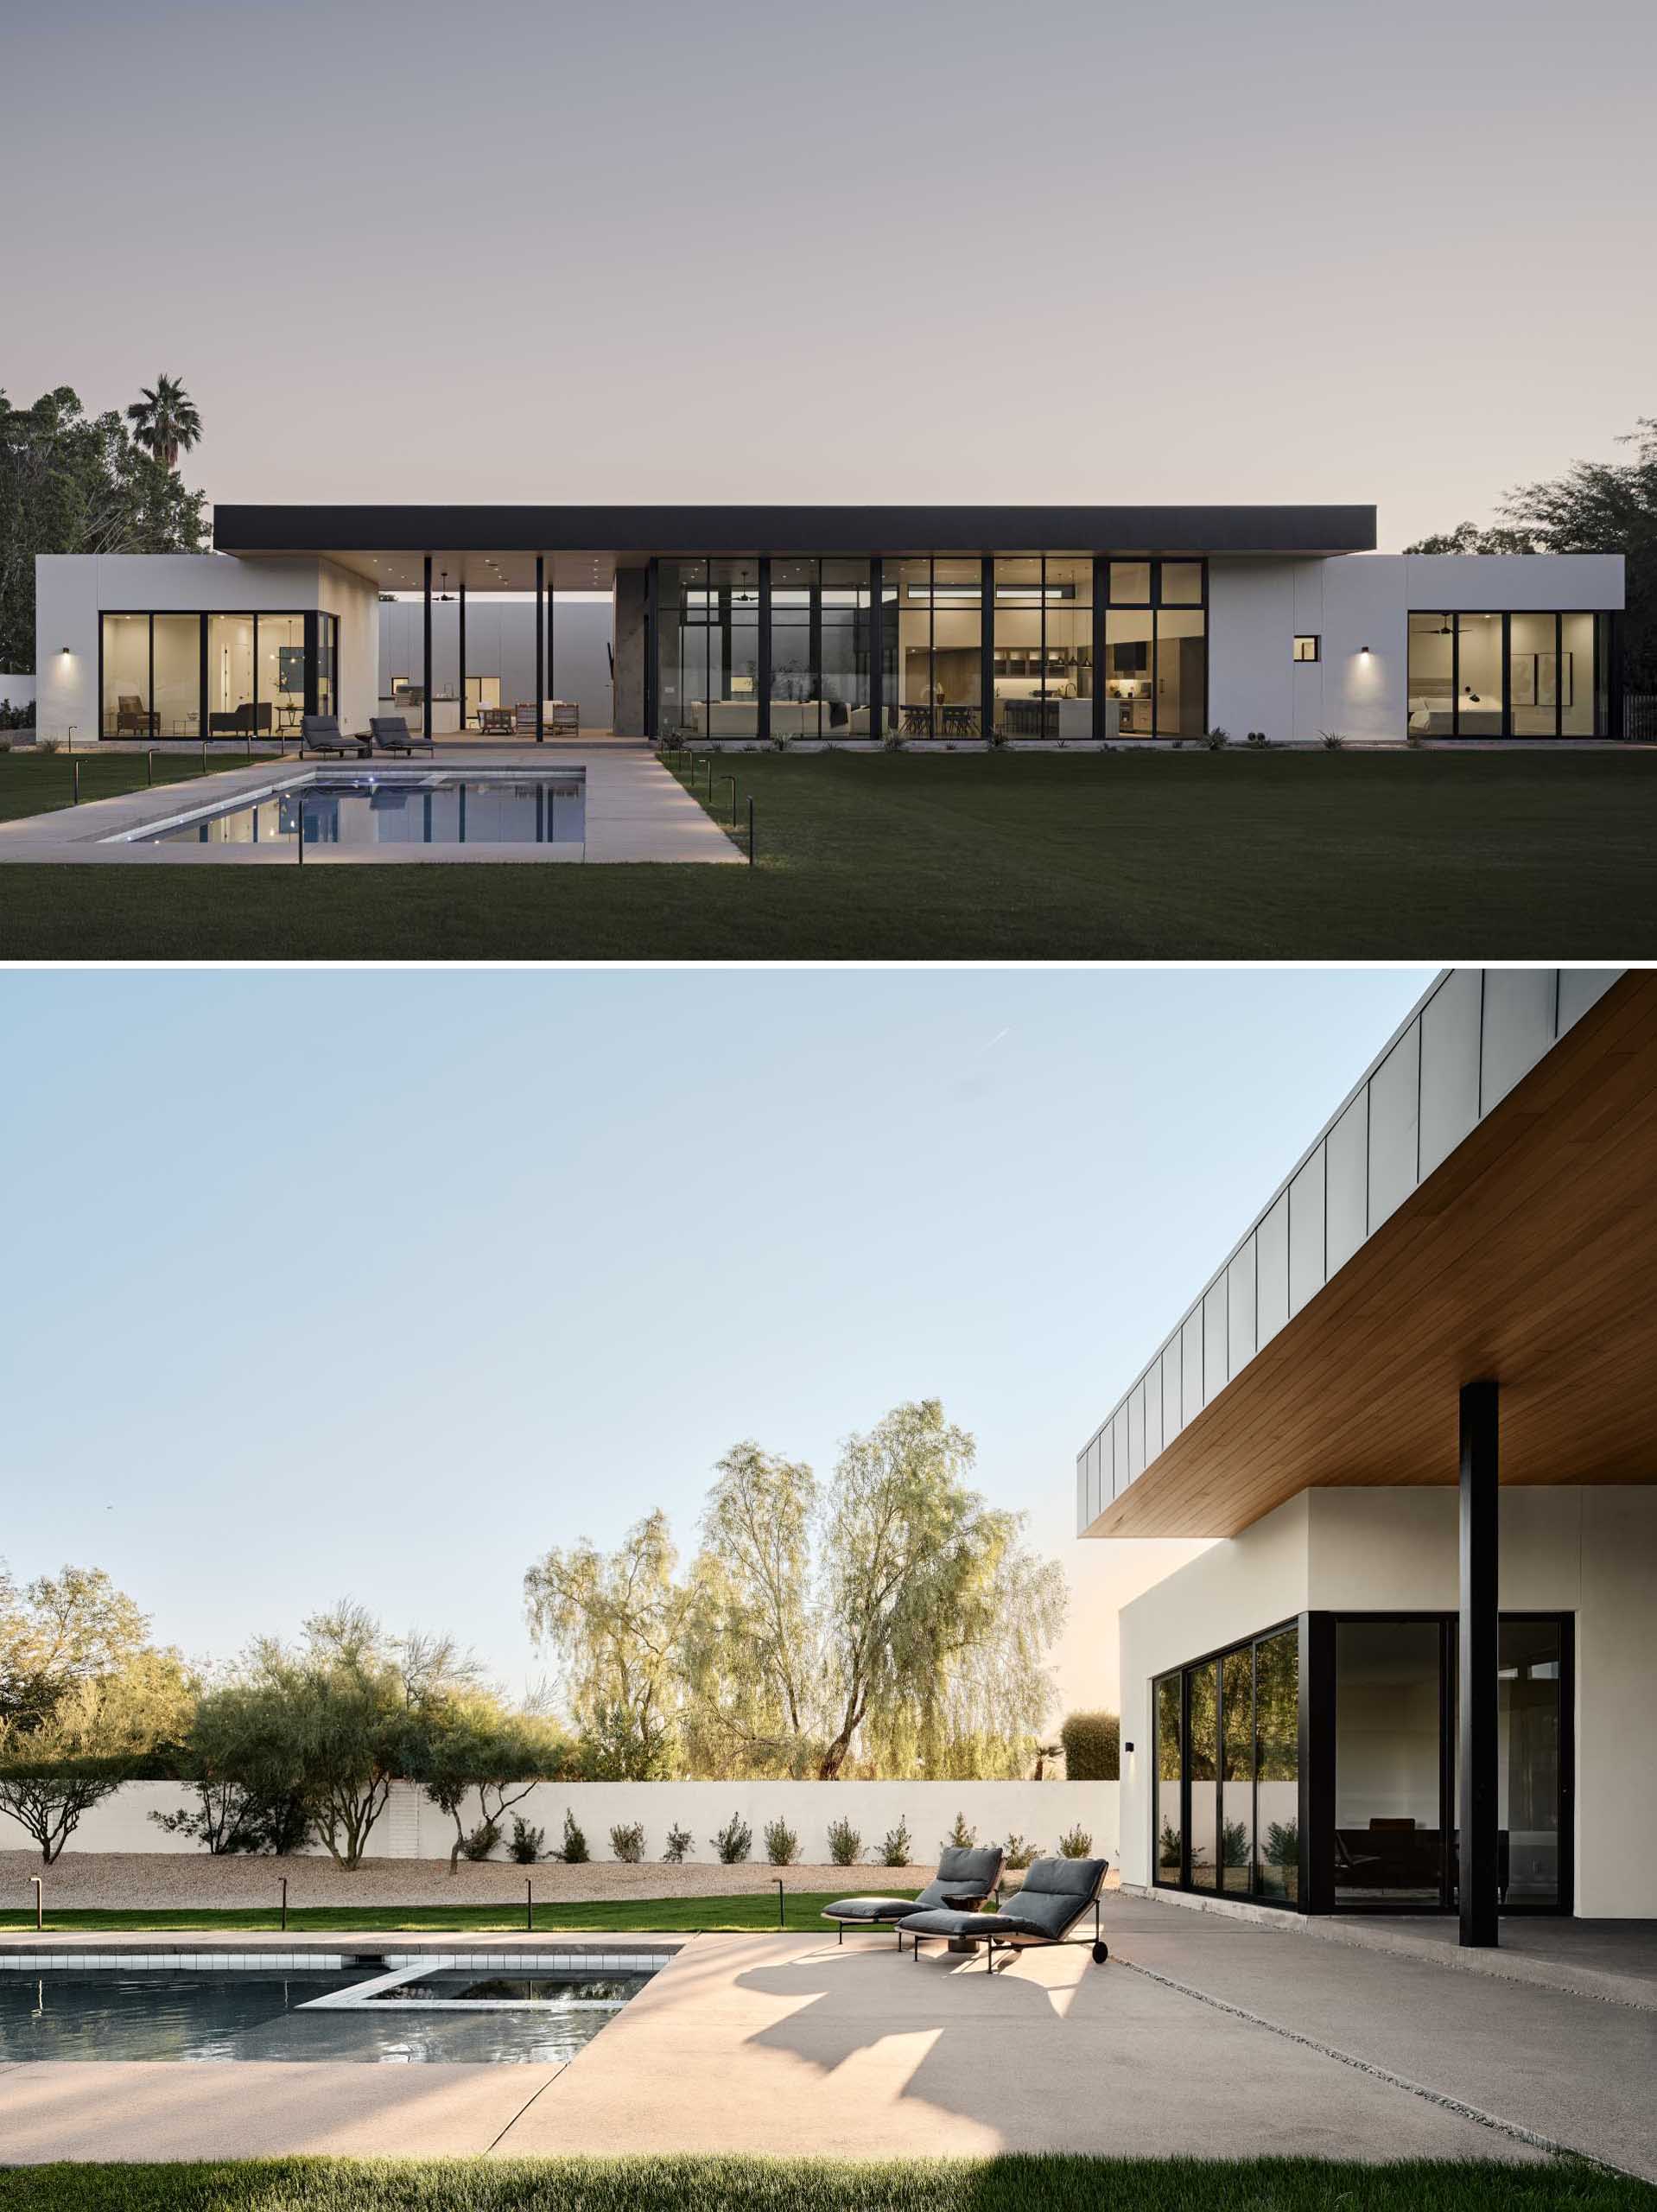 A modern house with large glass walls, an outdoor living room, and a swimming pool.